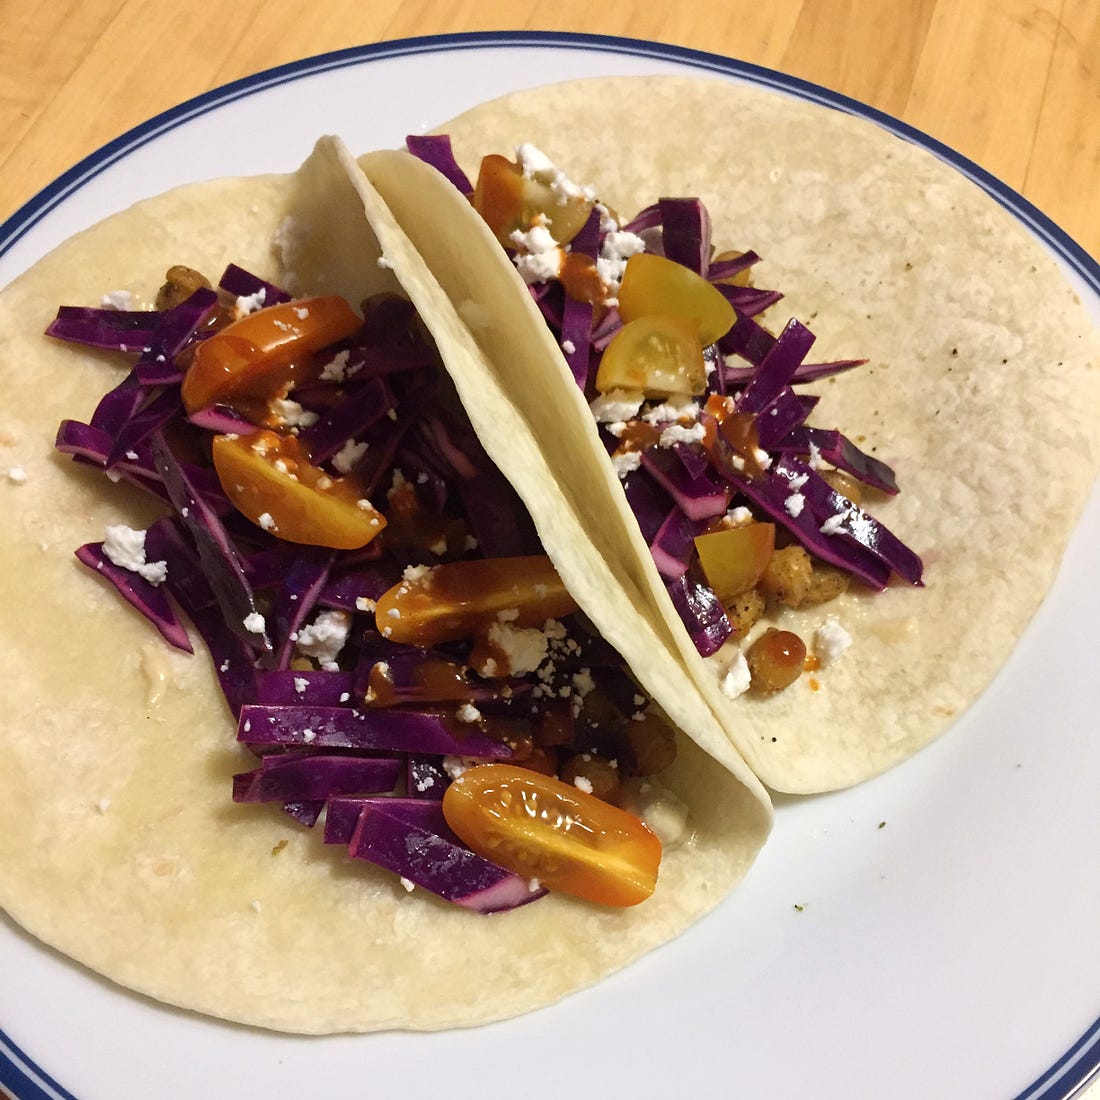 On a white plate, two flour tortillas filled with the taco filling described above. Most visible is the red cabbage slaw, crumbles of feta, and pieces of tomato with hot sauce overtop.